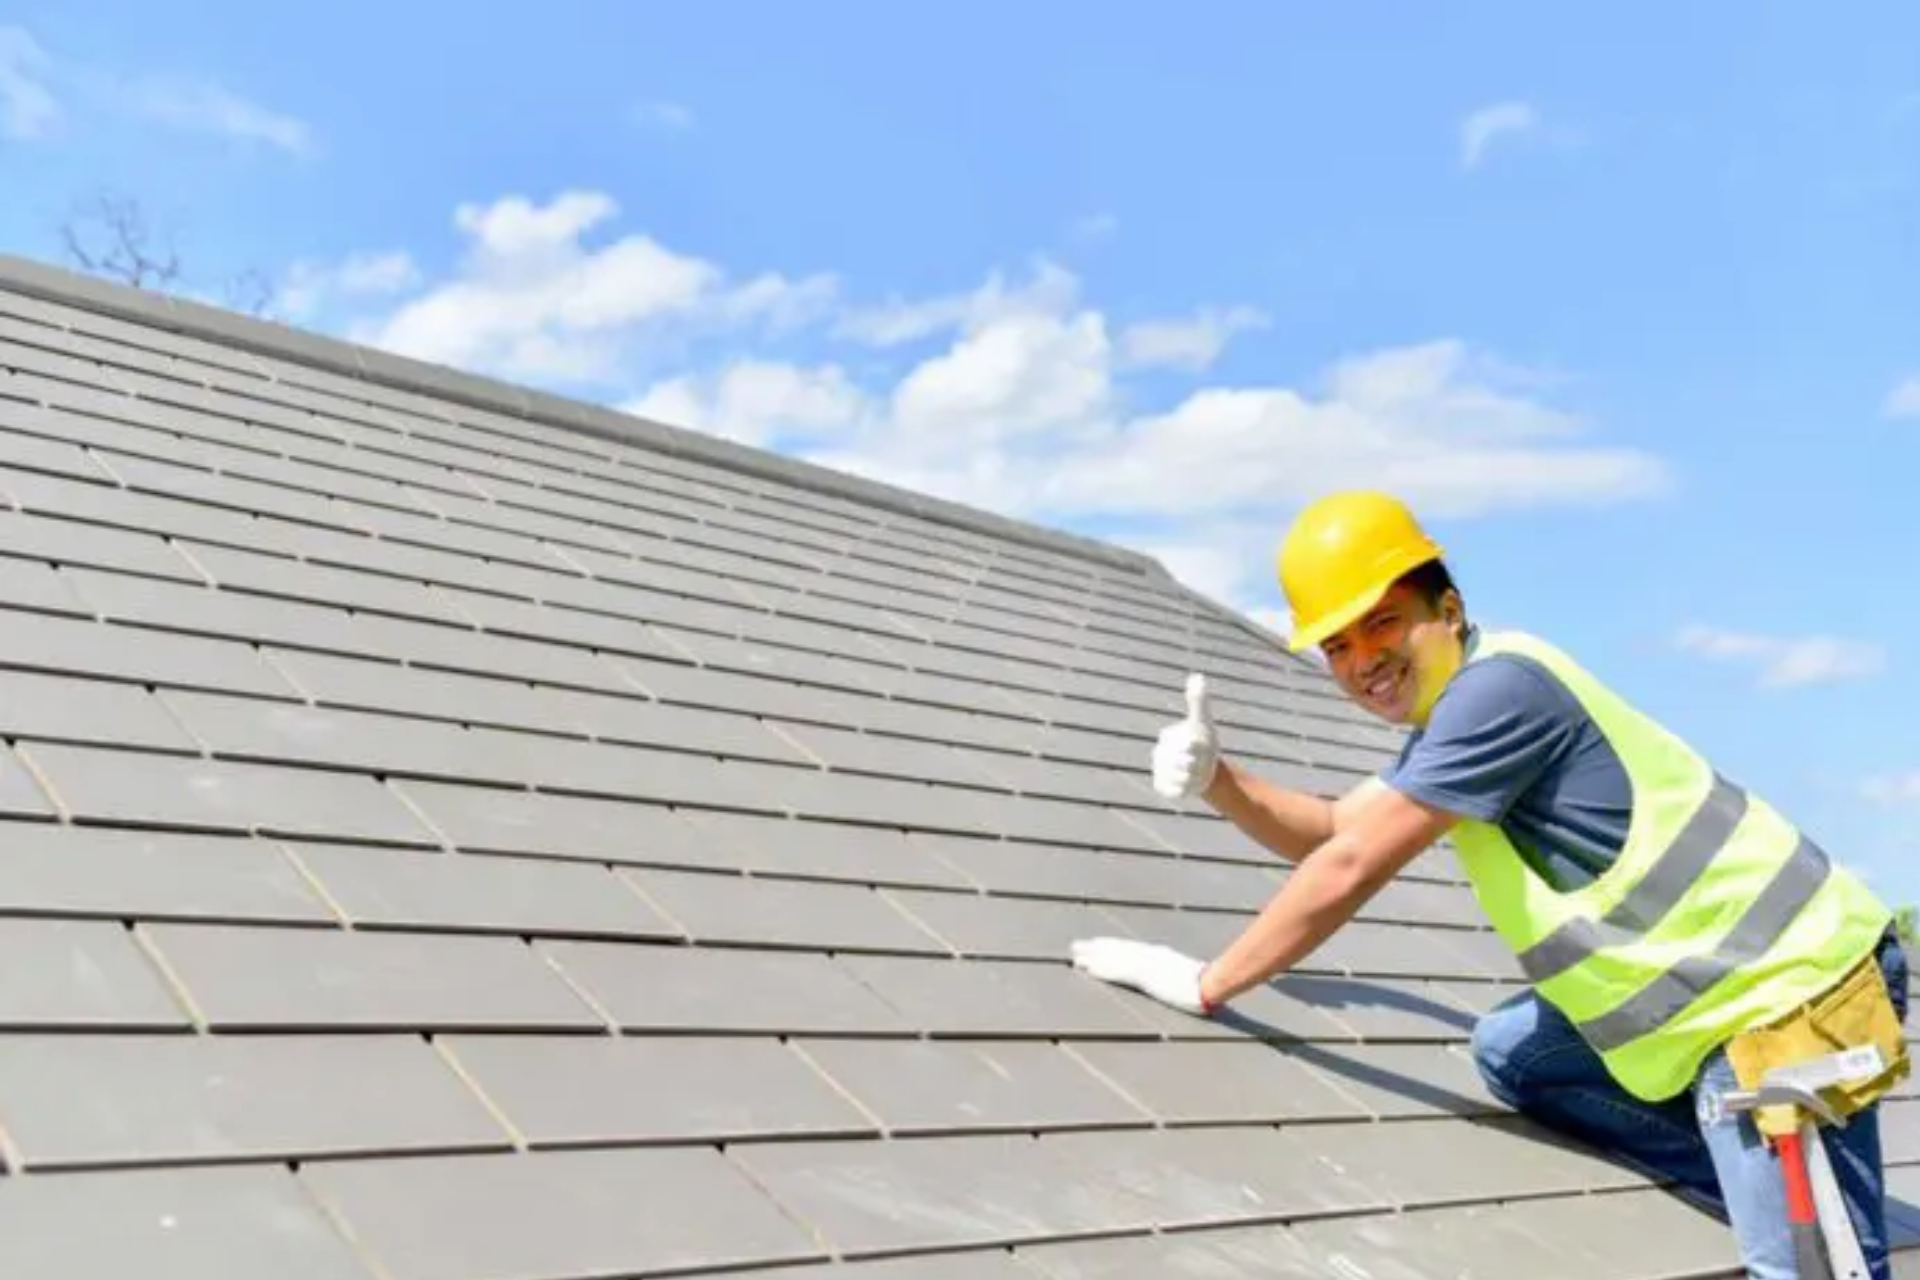 How To Identify A Reputable Roofer